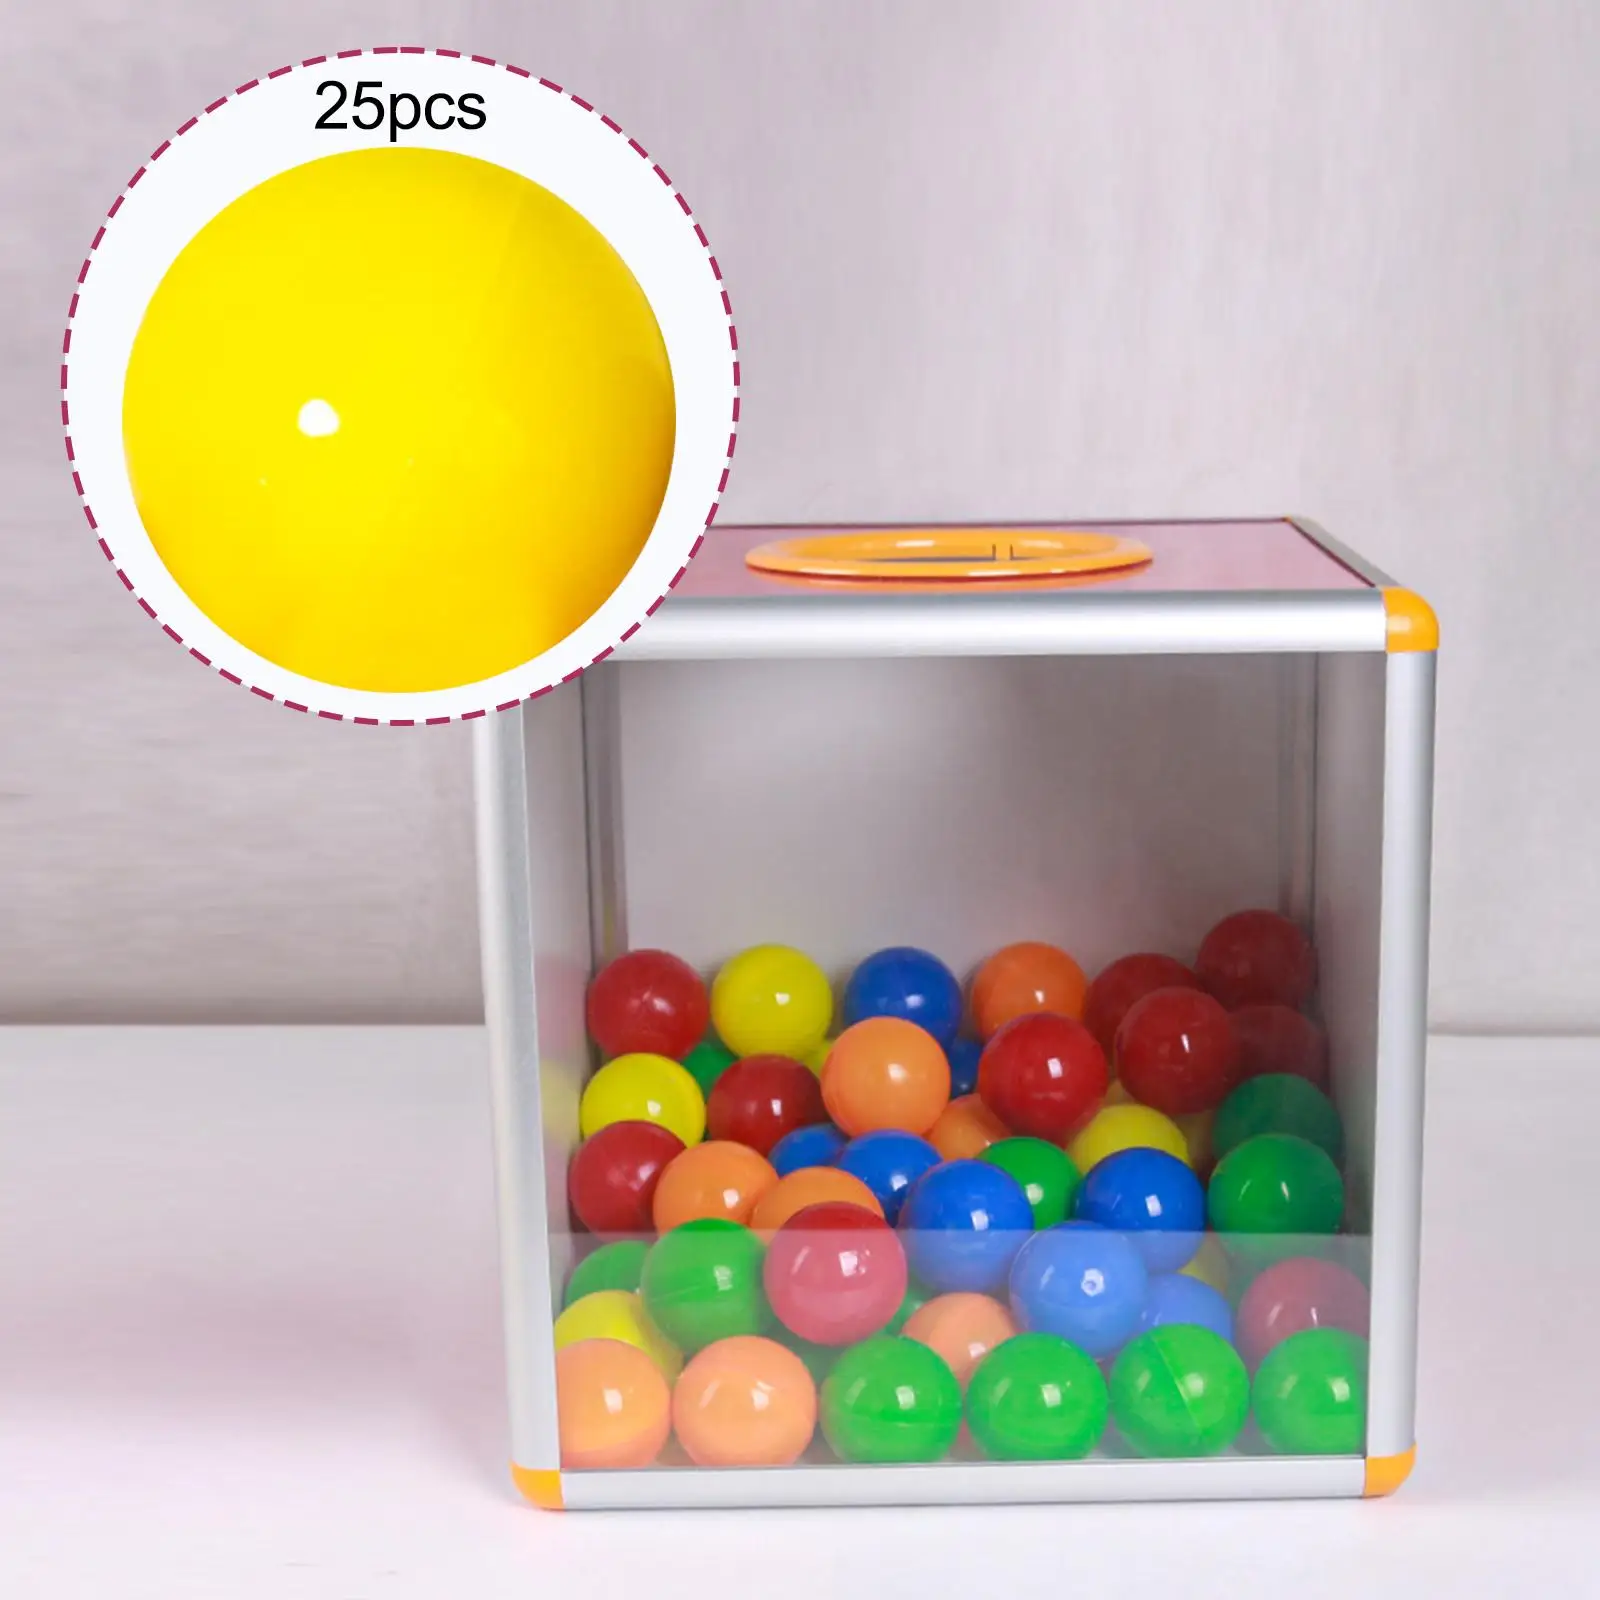 25Pcs Bingo Ball Replacement Parts Fittings Portable Opening Calling Balls for Office Large Group Games Nights Household Parties